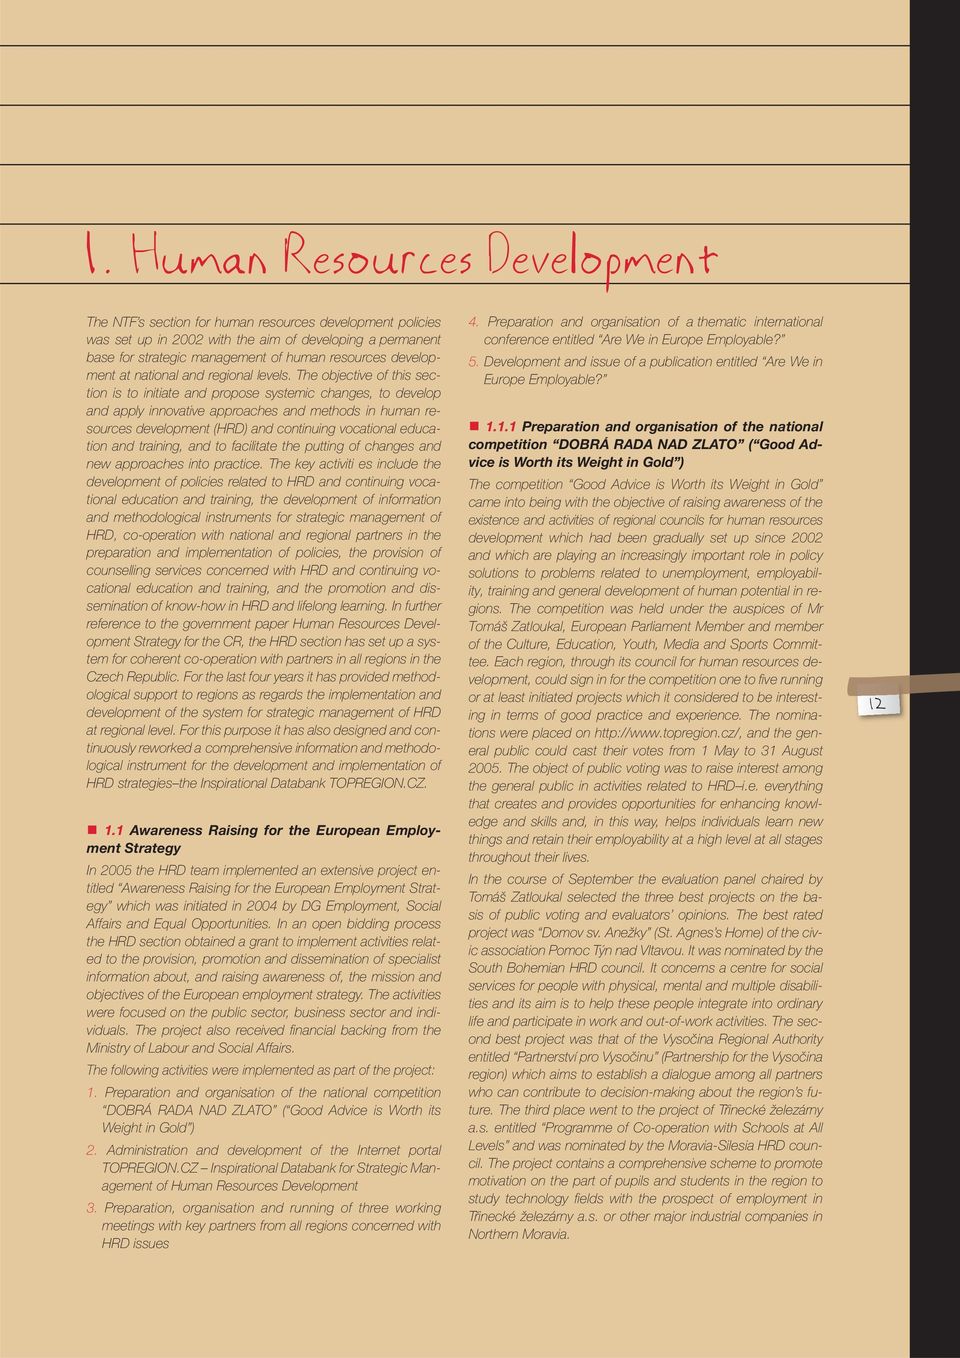 The objective of this section is to initiate and propose systemic changes, to develop and apply innovative approaches and methods in human resources development (HRD) and continuing vocational